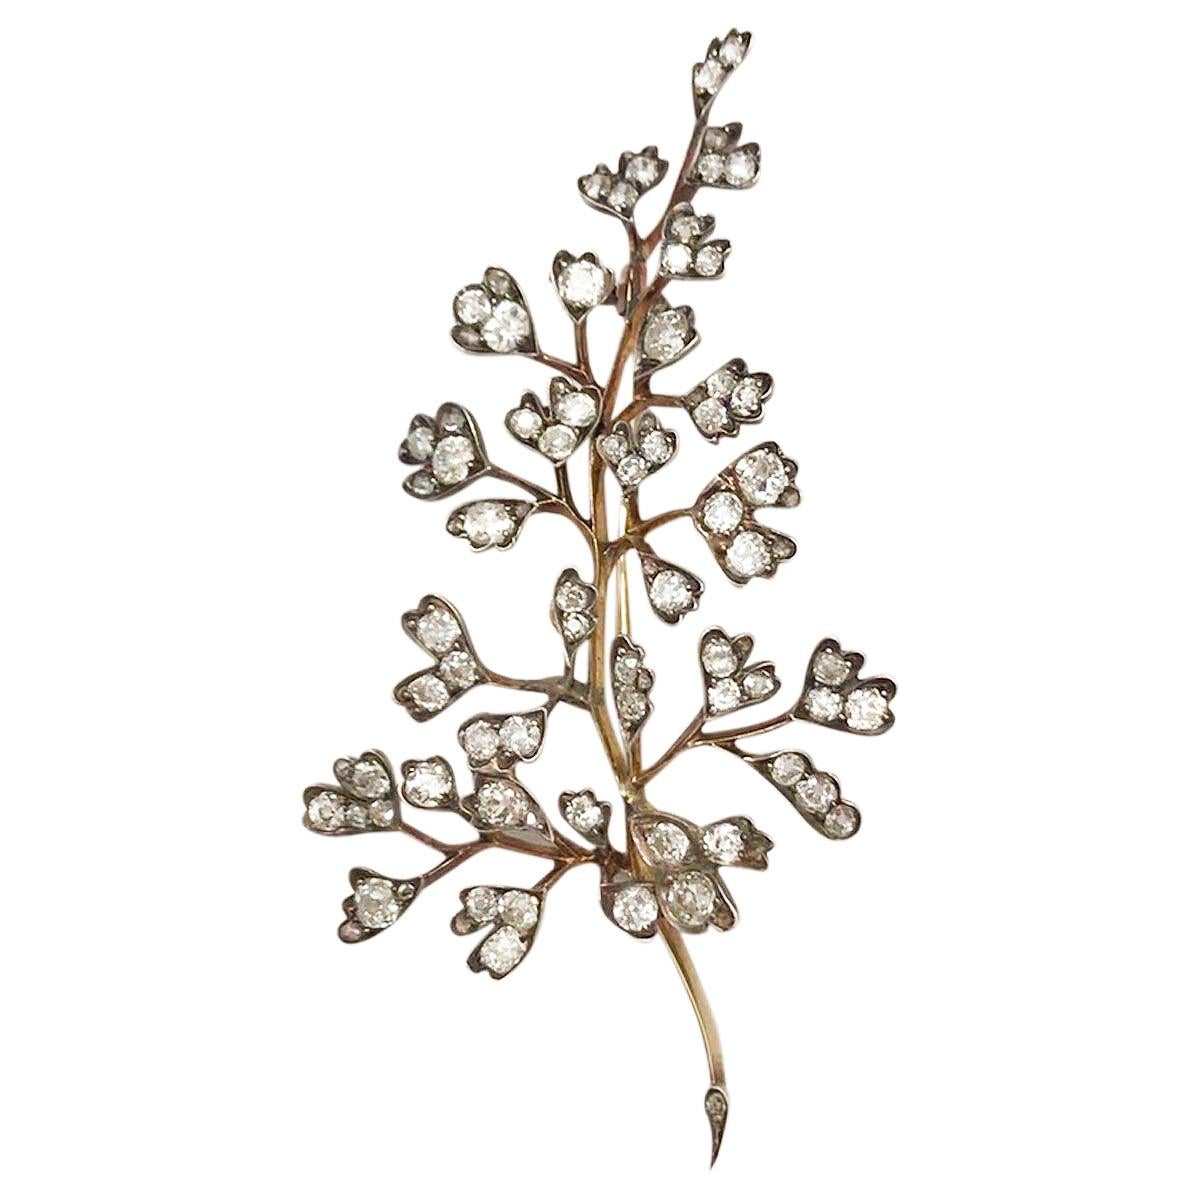 This pin is just so elegant and sophisticated, finely made and delicate this special piece can be added to any outfit to make it something classic and stylish. Crafted in silver over gold indicative of the era, its fern like structure showcases